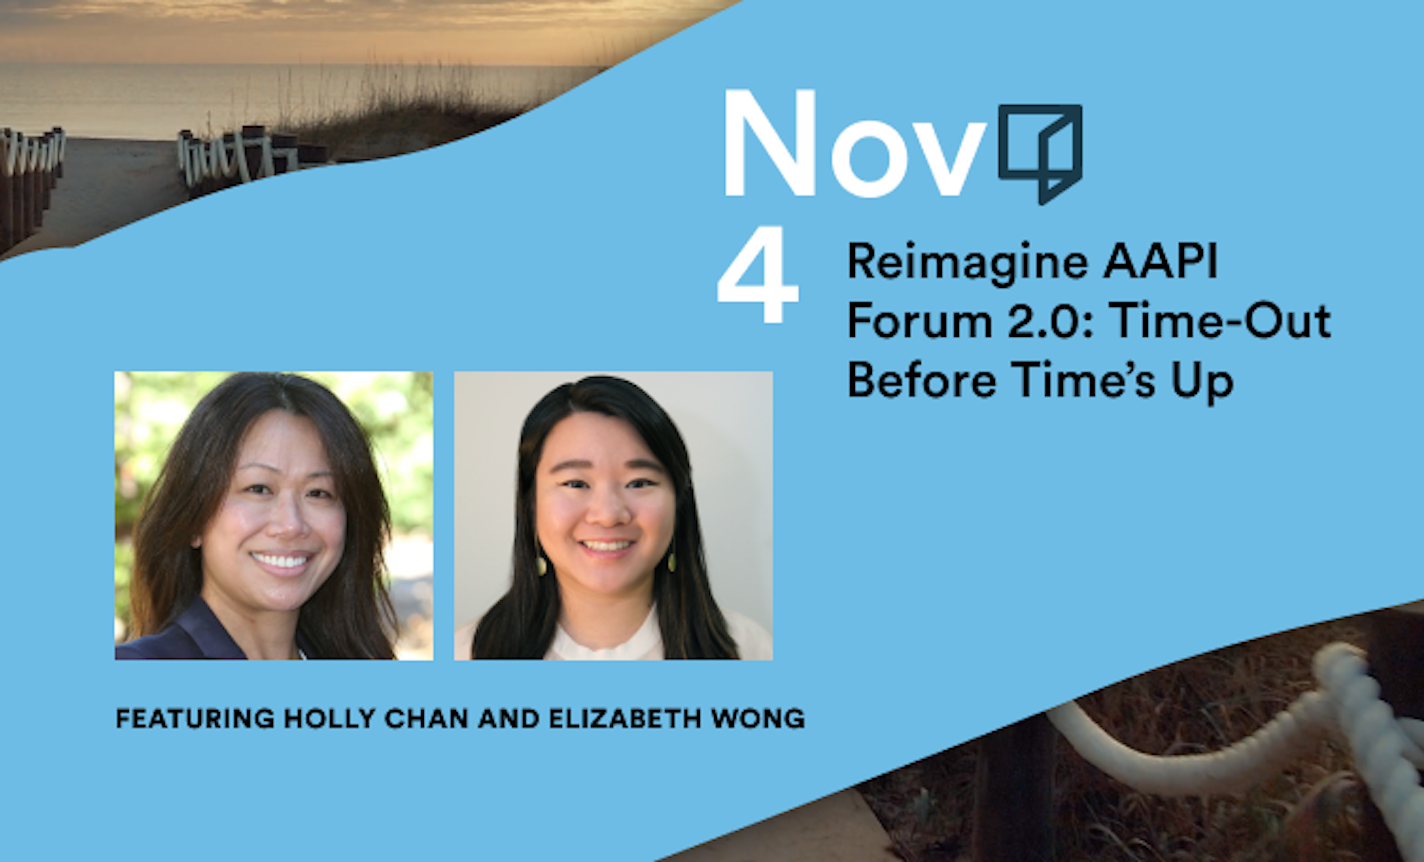 Reimagine AAPI Forum 2.0: Time-Out Before Time’s Up